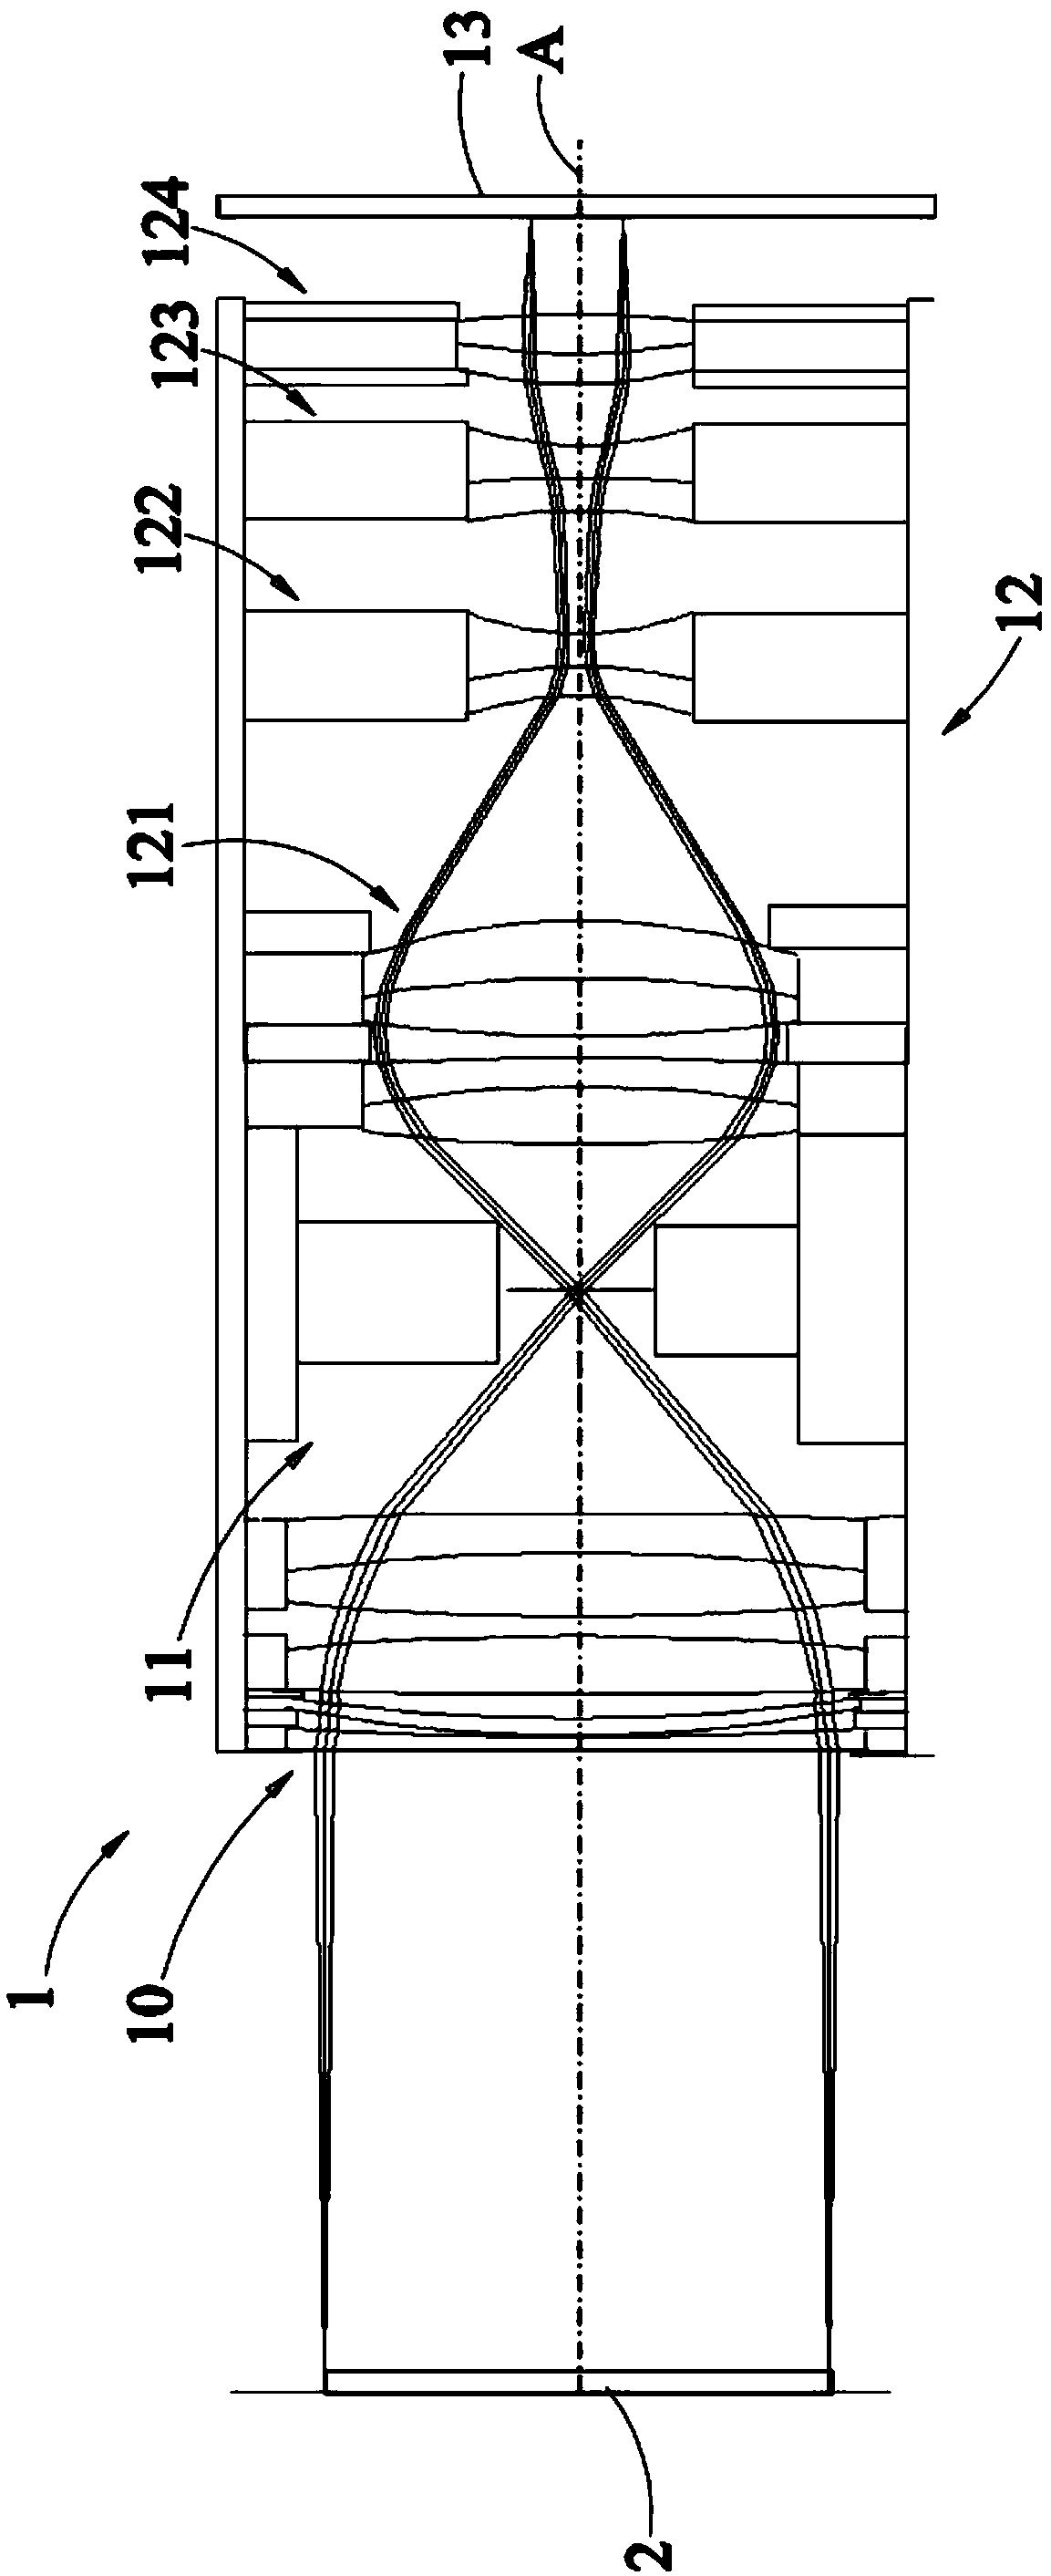 Double-telecentric optical detection device with variable multiplying power